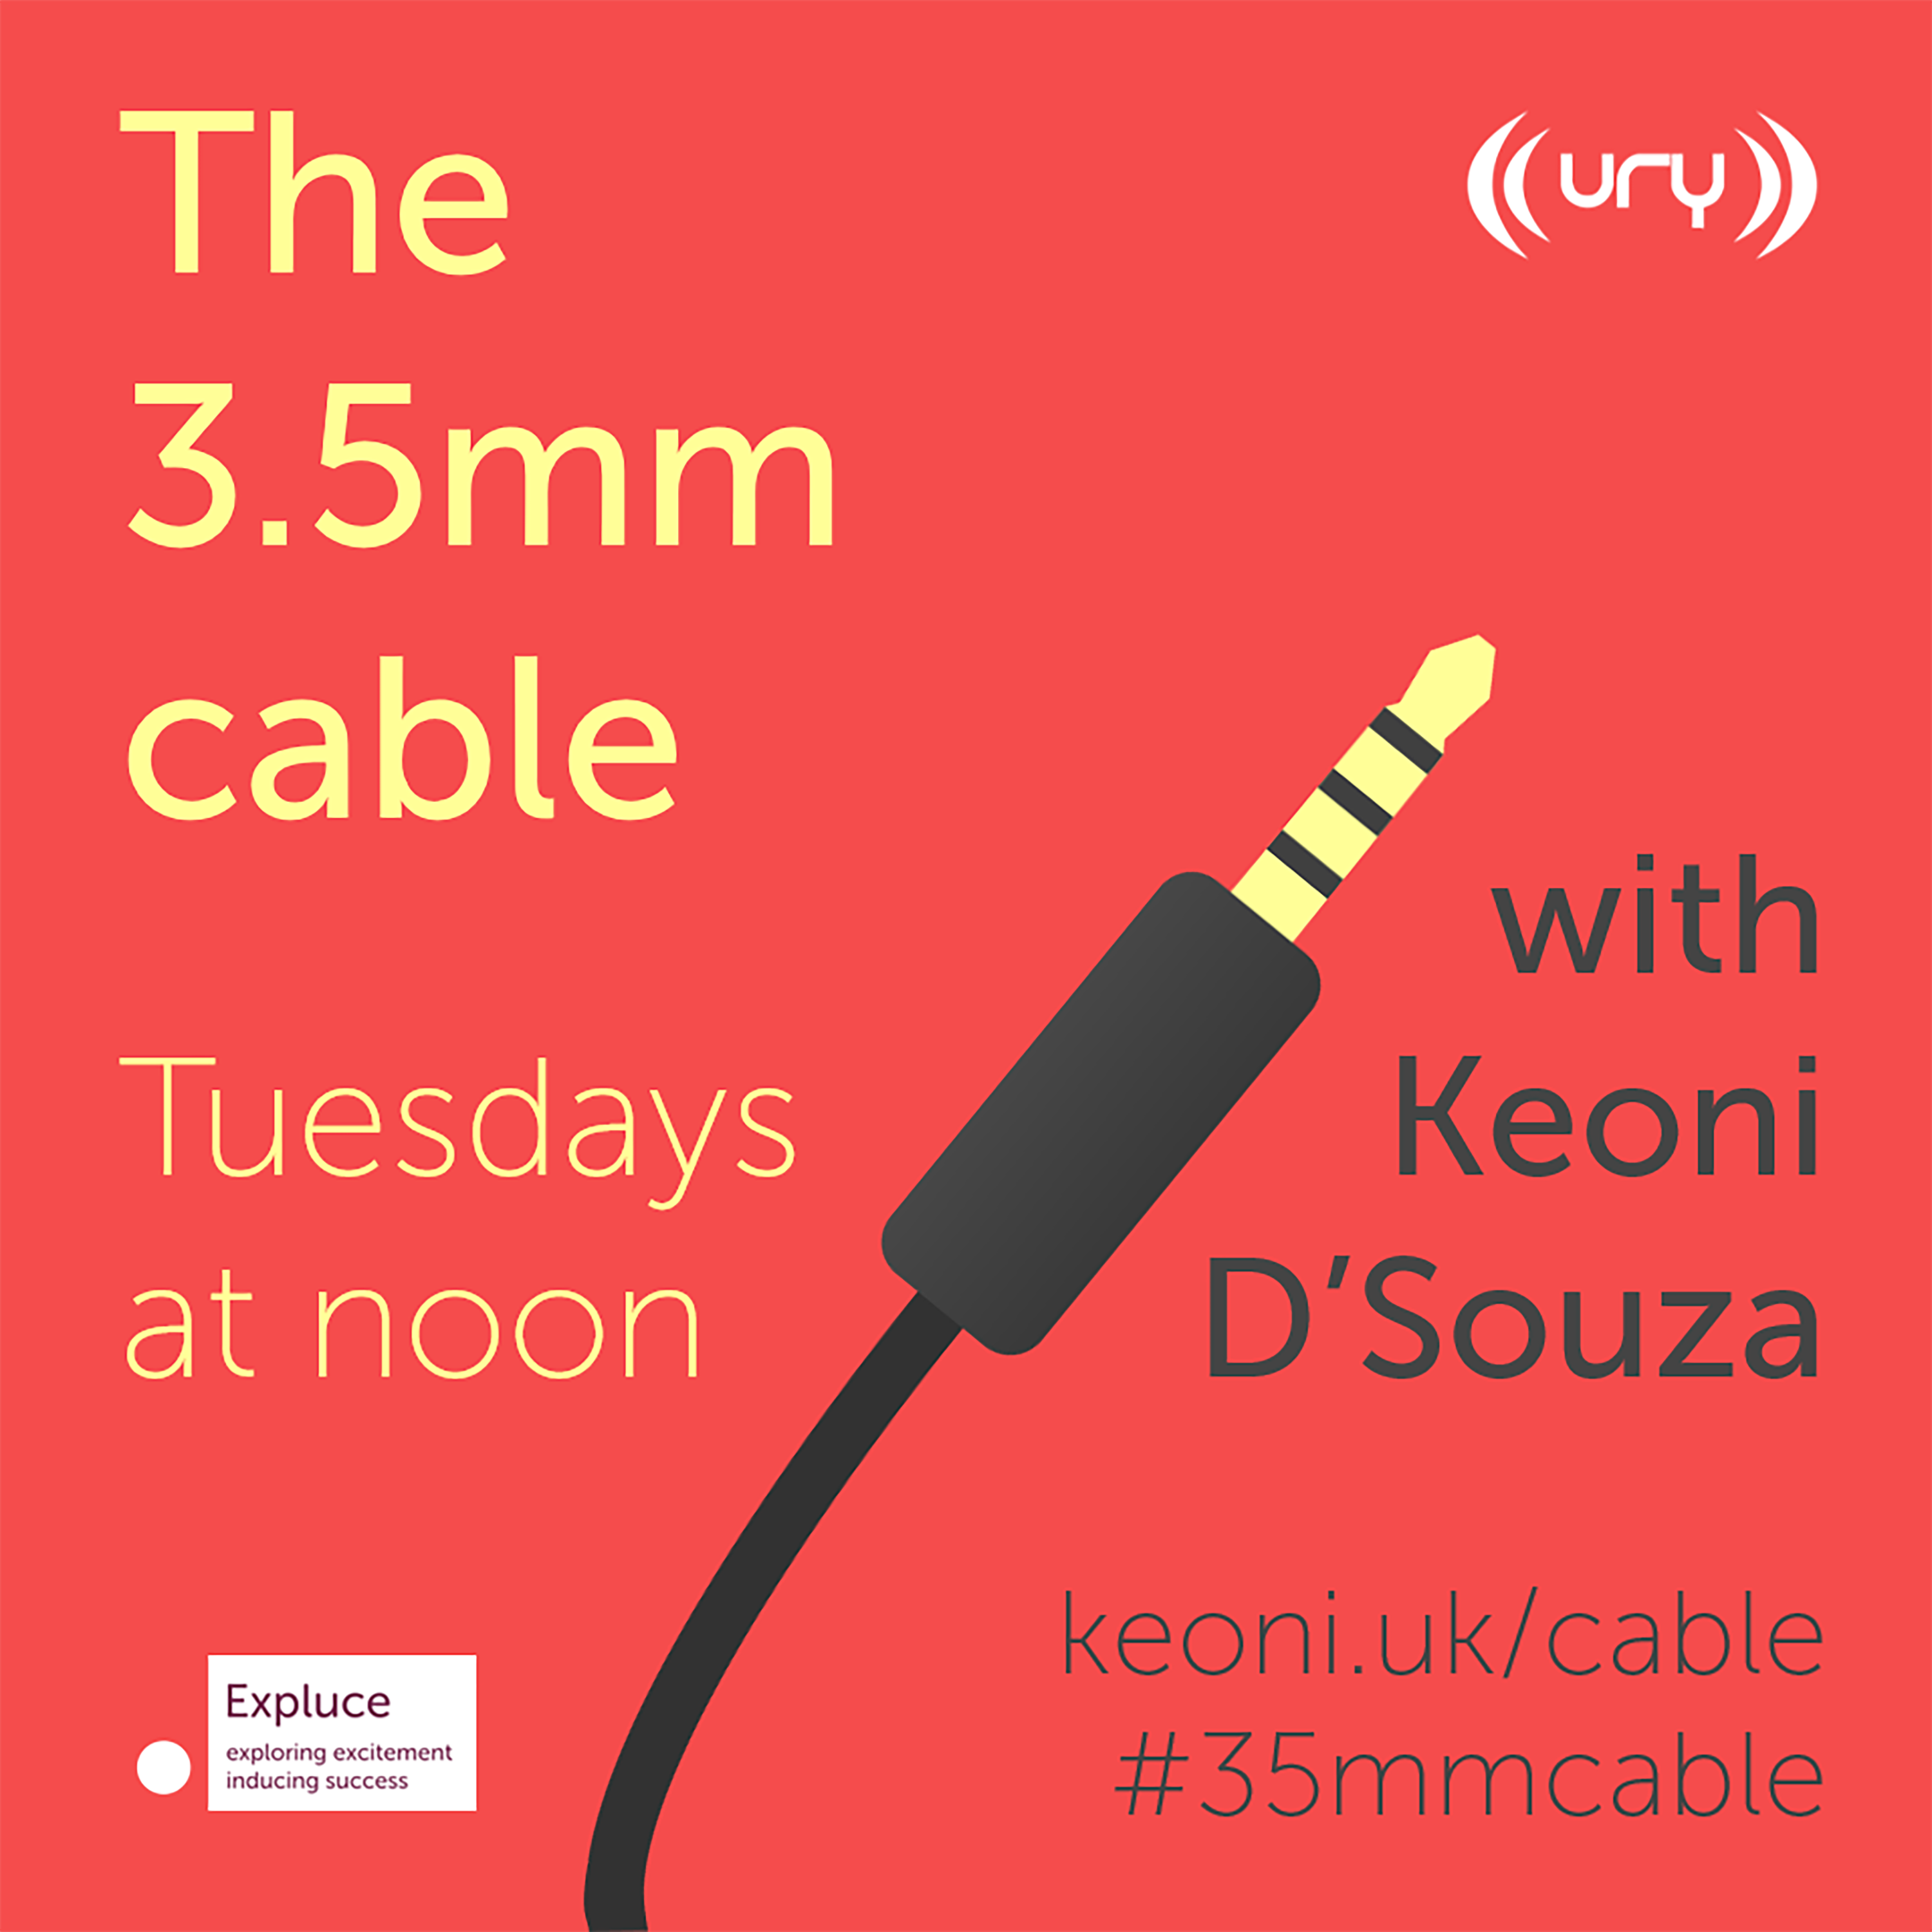 The 3.5mm cable Logo